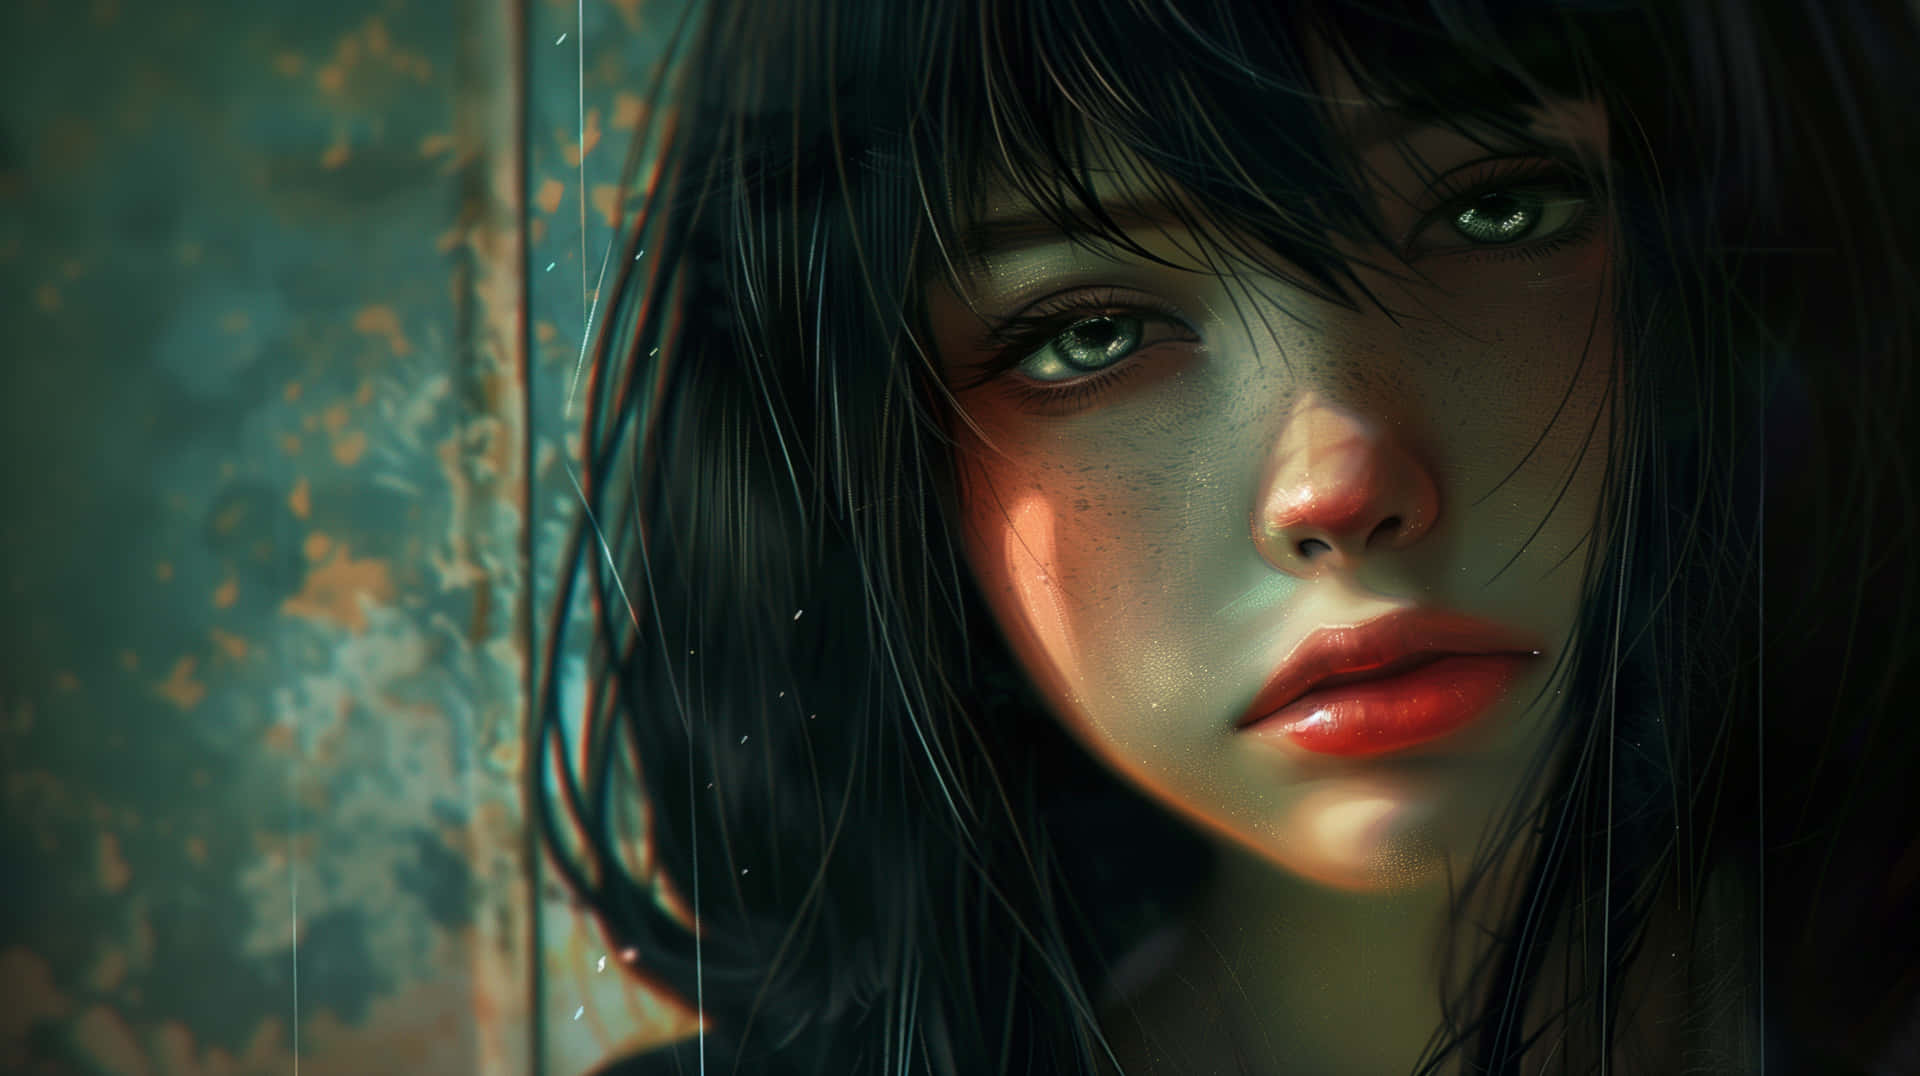 Emo Girl With Tearful Eyes Wallpaper